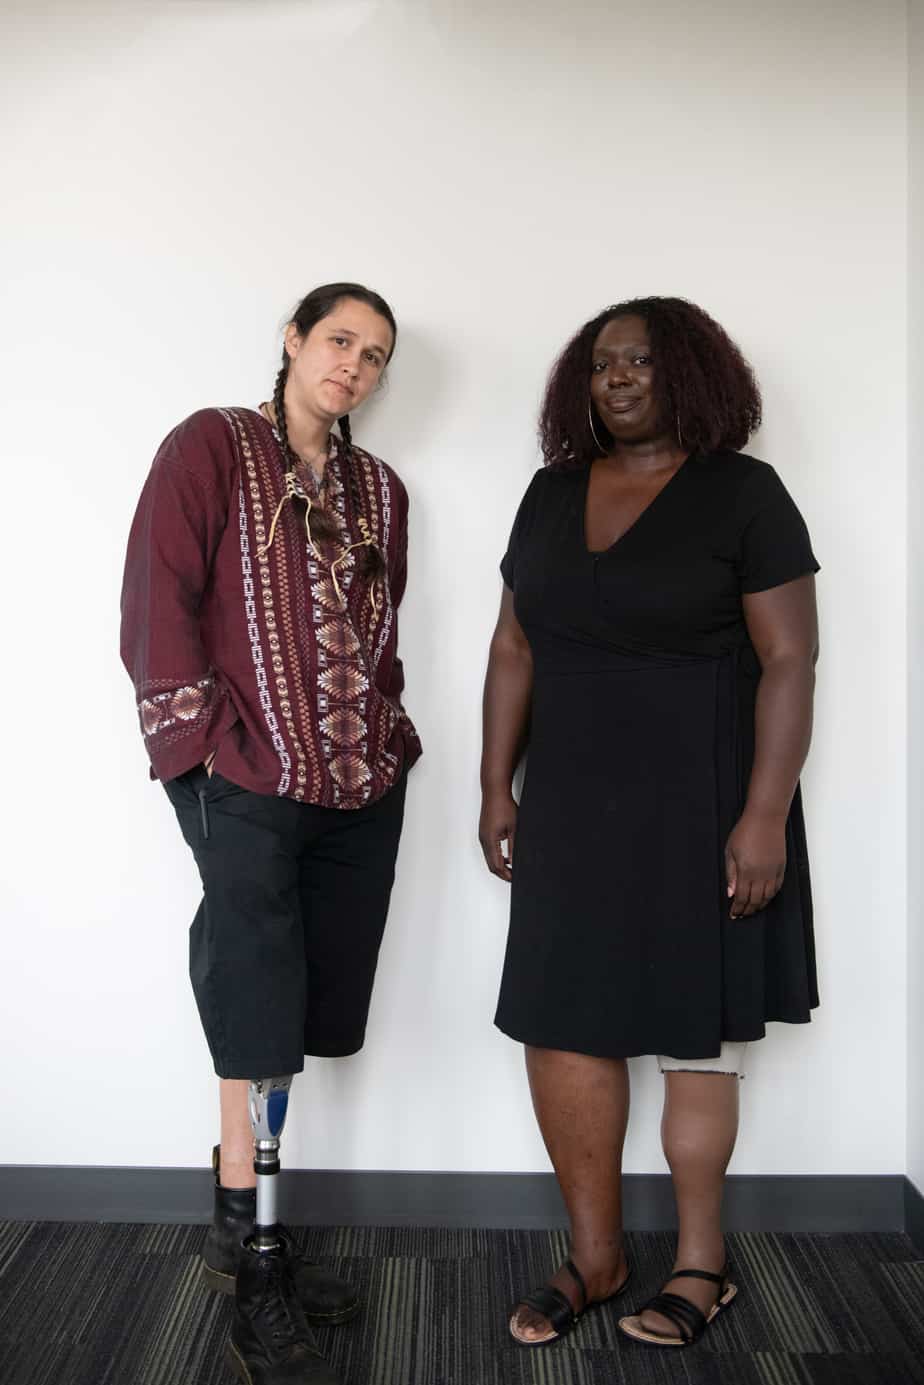 An Indigenous Two-Spirit person and a Black woman stand in front of a white wall with neutral expressions. They are both wearing prosthetic legs.